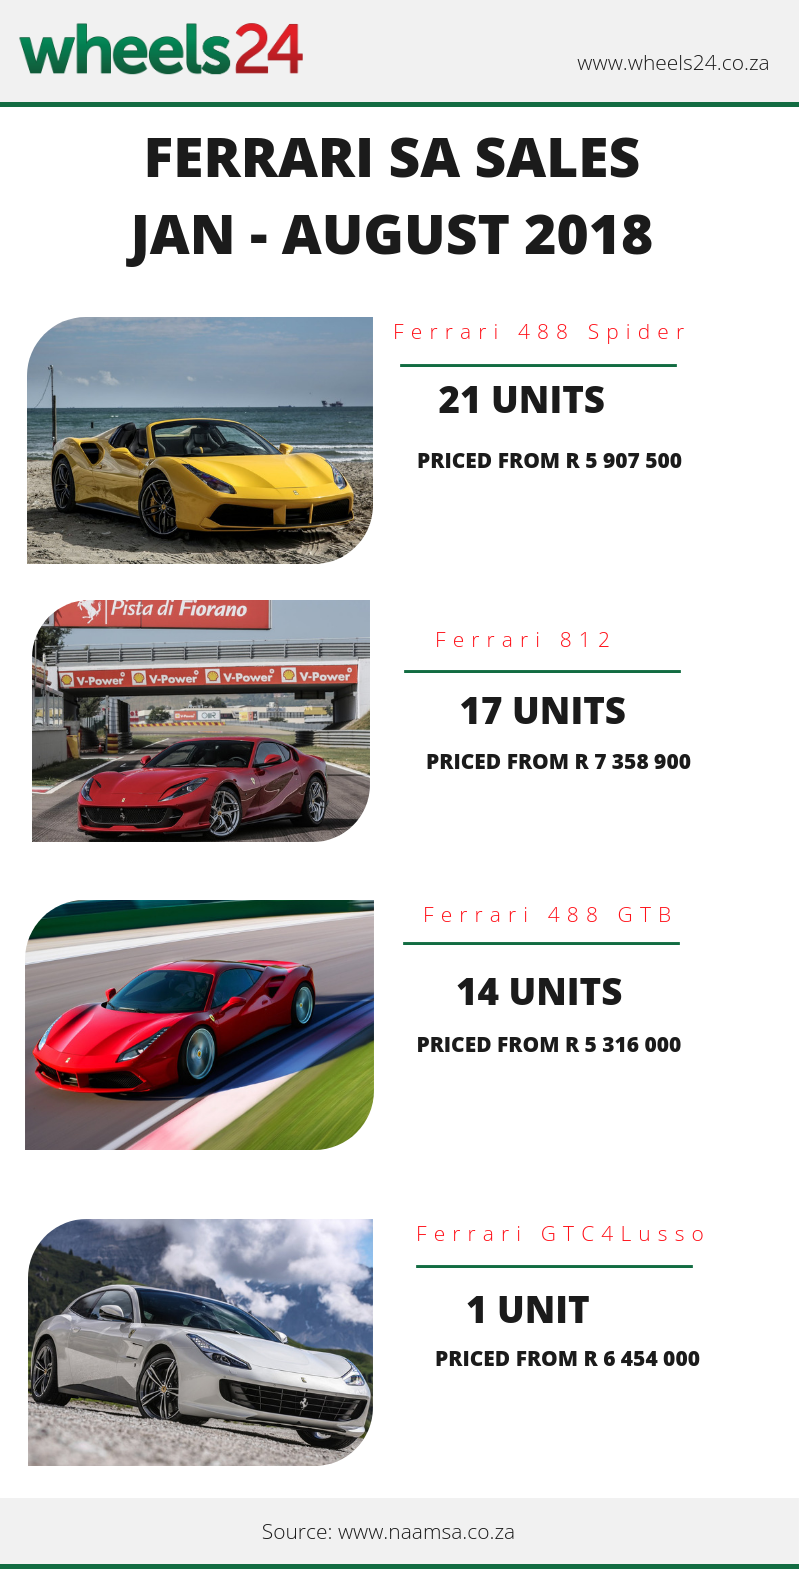 SEE Here's how many sports cars Ferrari has sold so far this year Wheels24